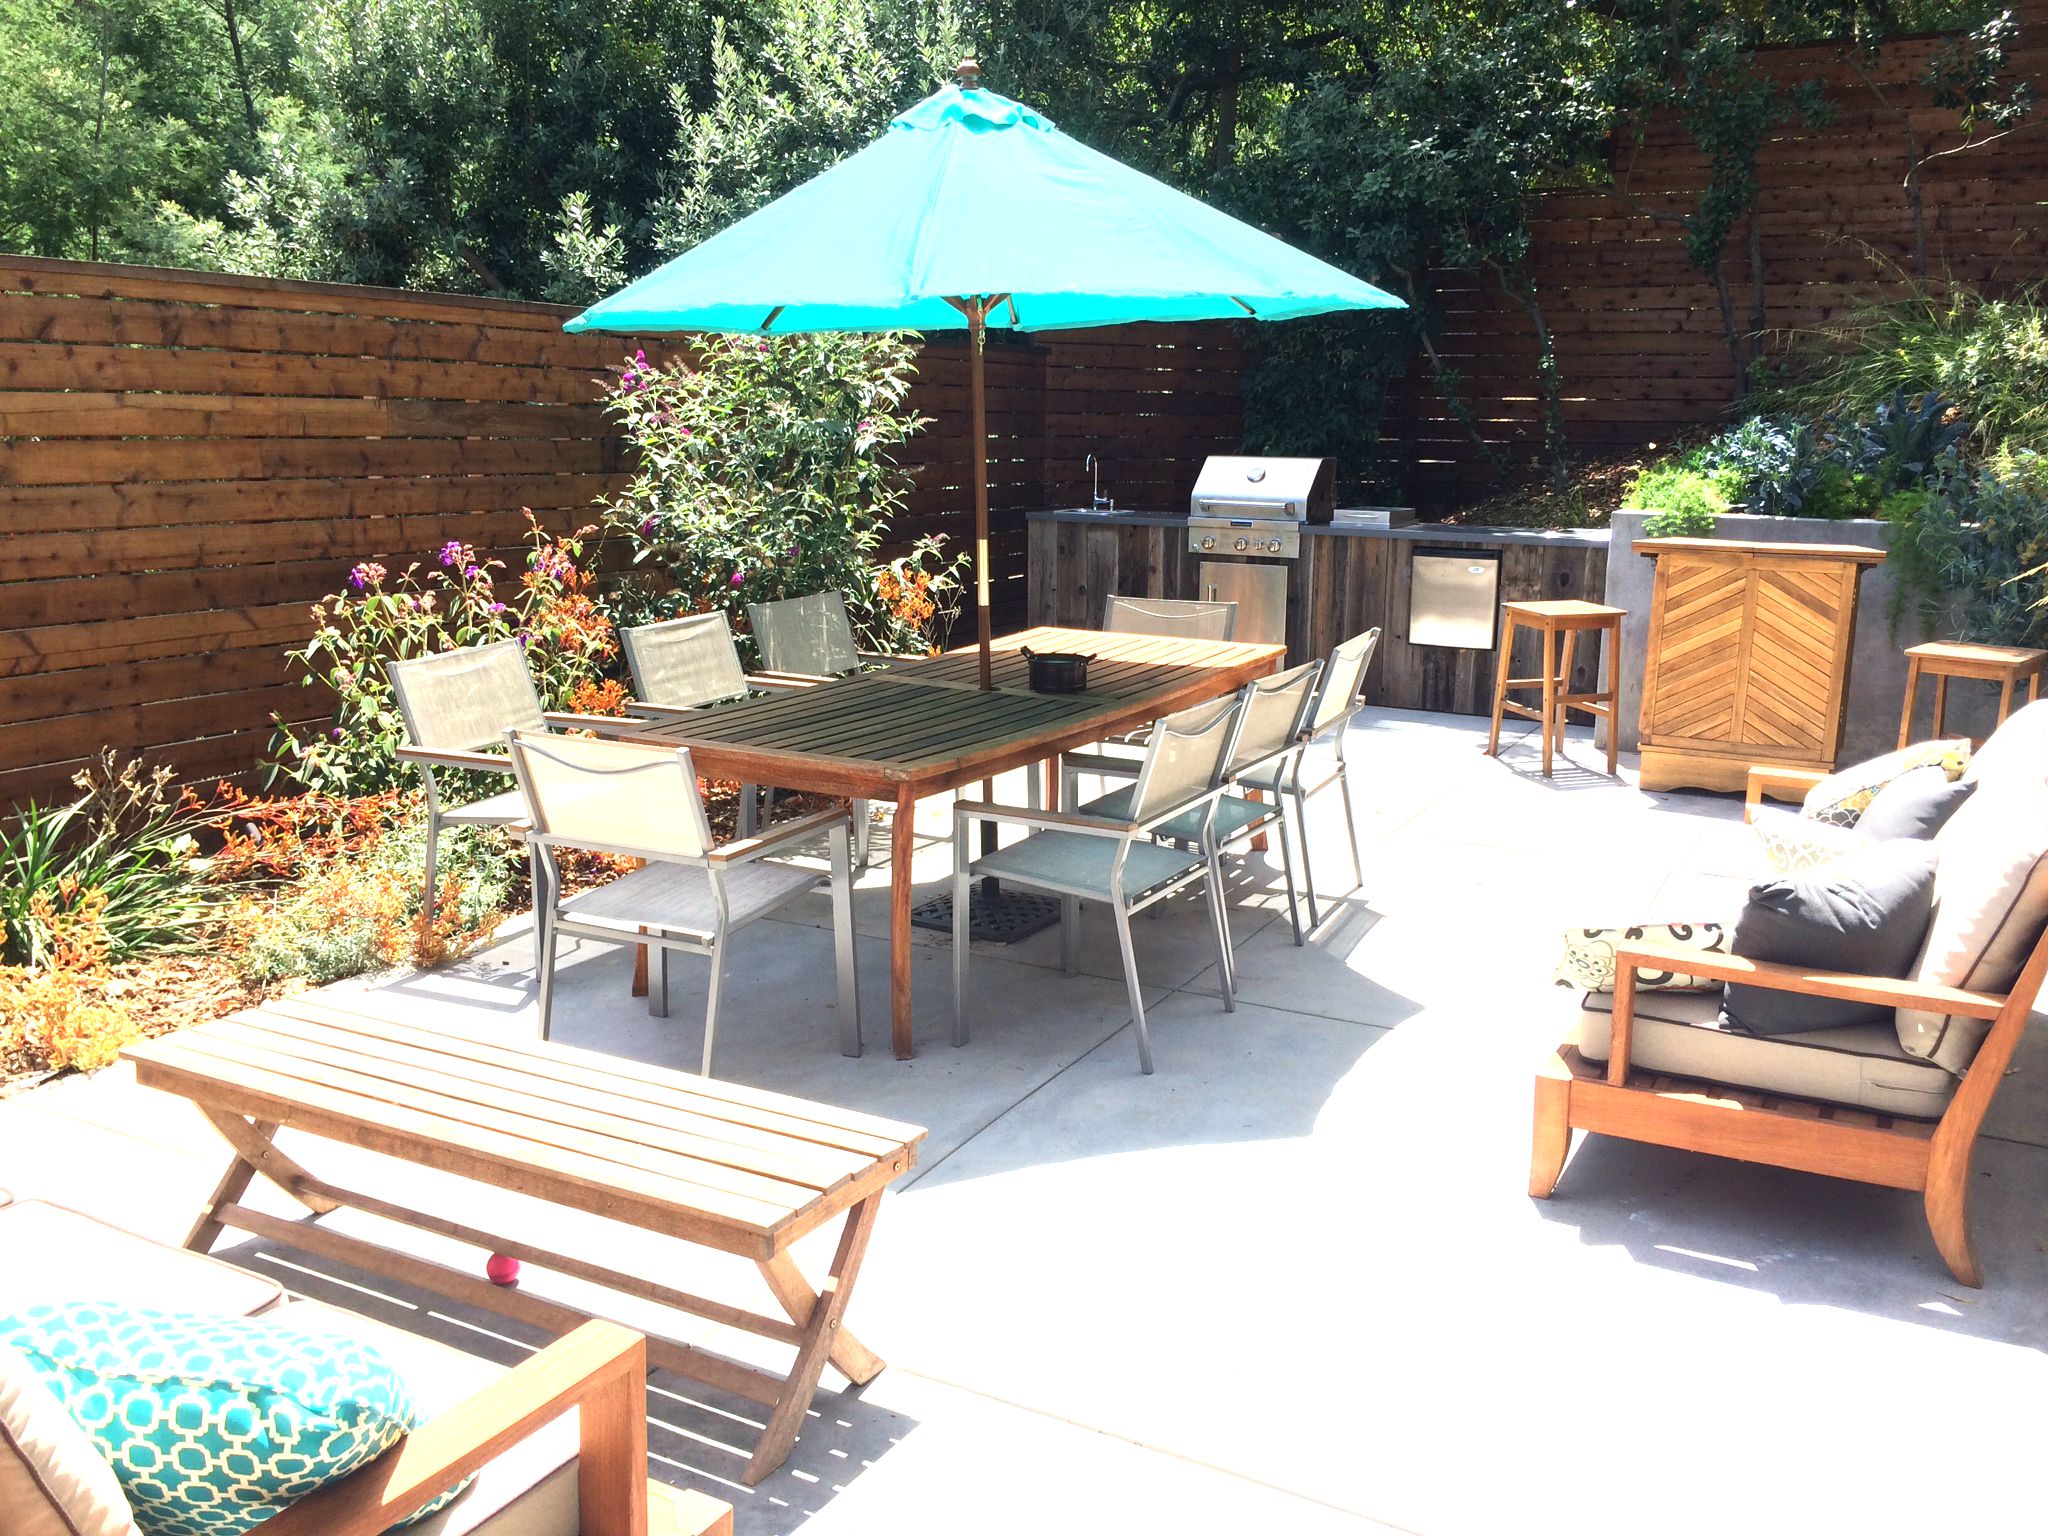 5 Steps to Getting Started On Transforming Your Backyard